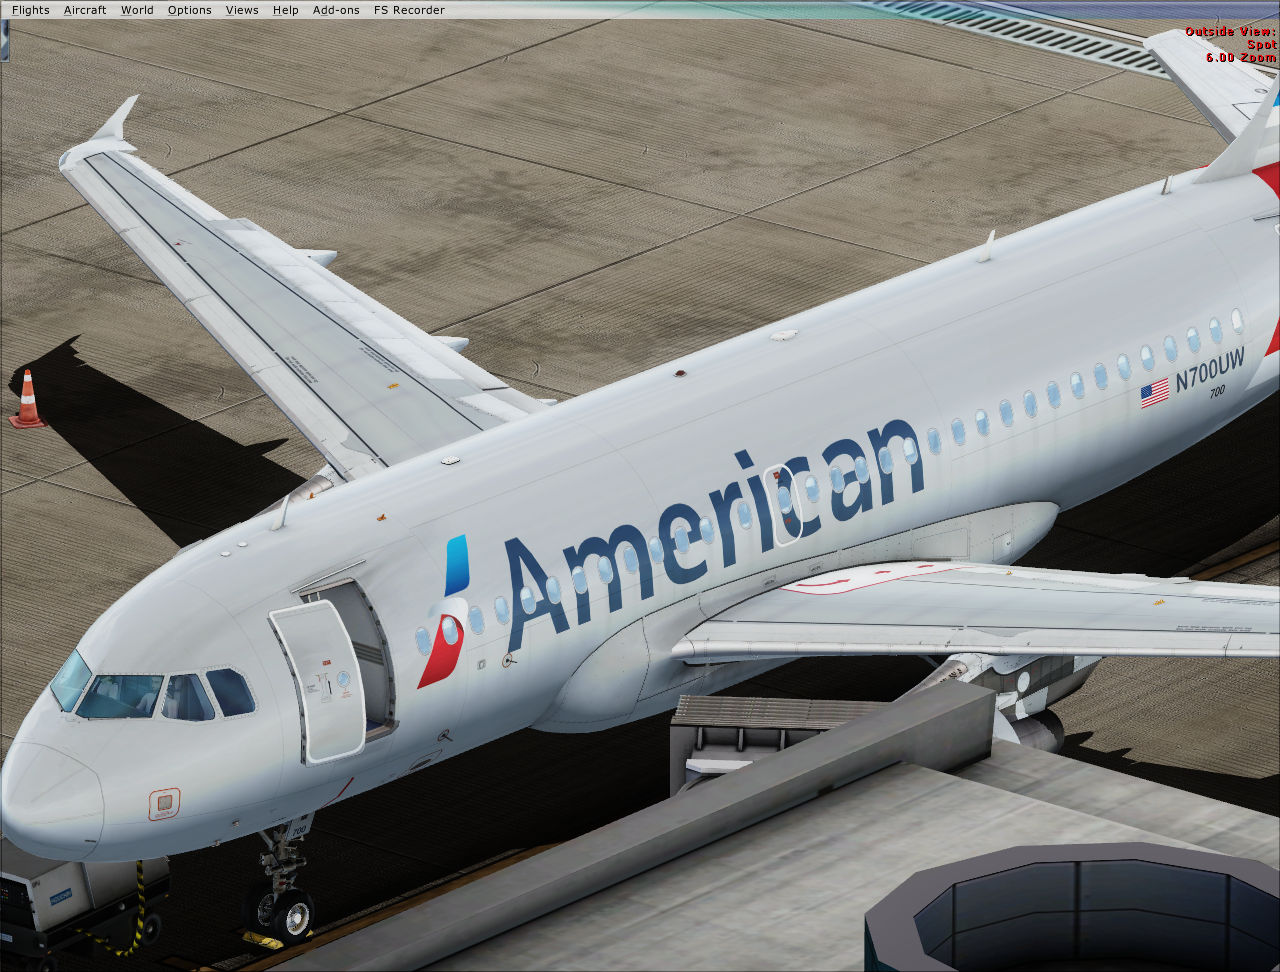 More information about "American Airlines N700UW Airbus A319-112 (Non-sharklet)"